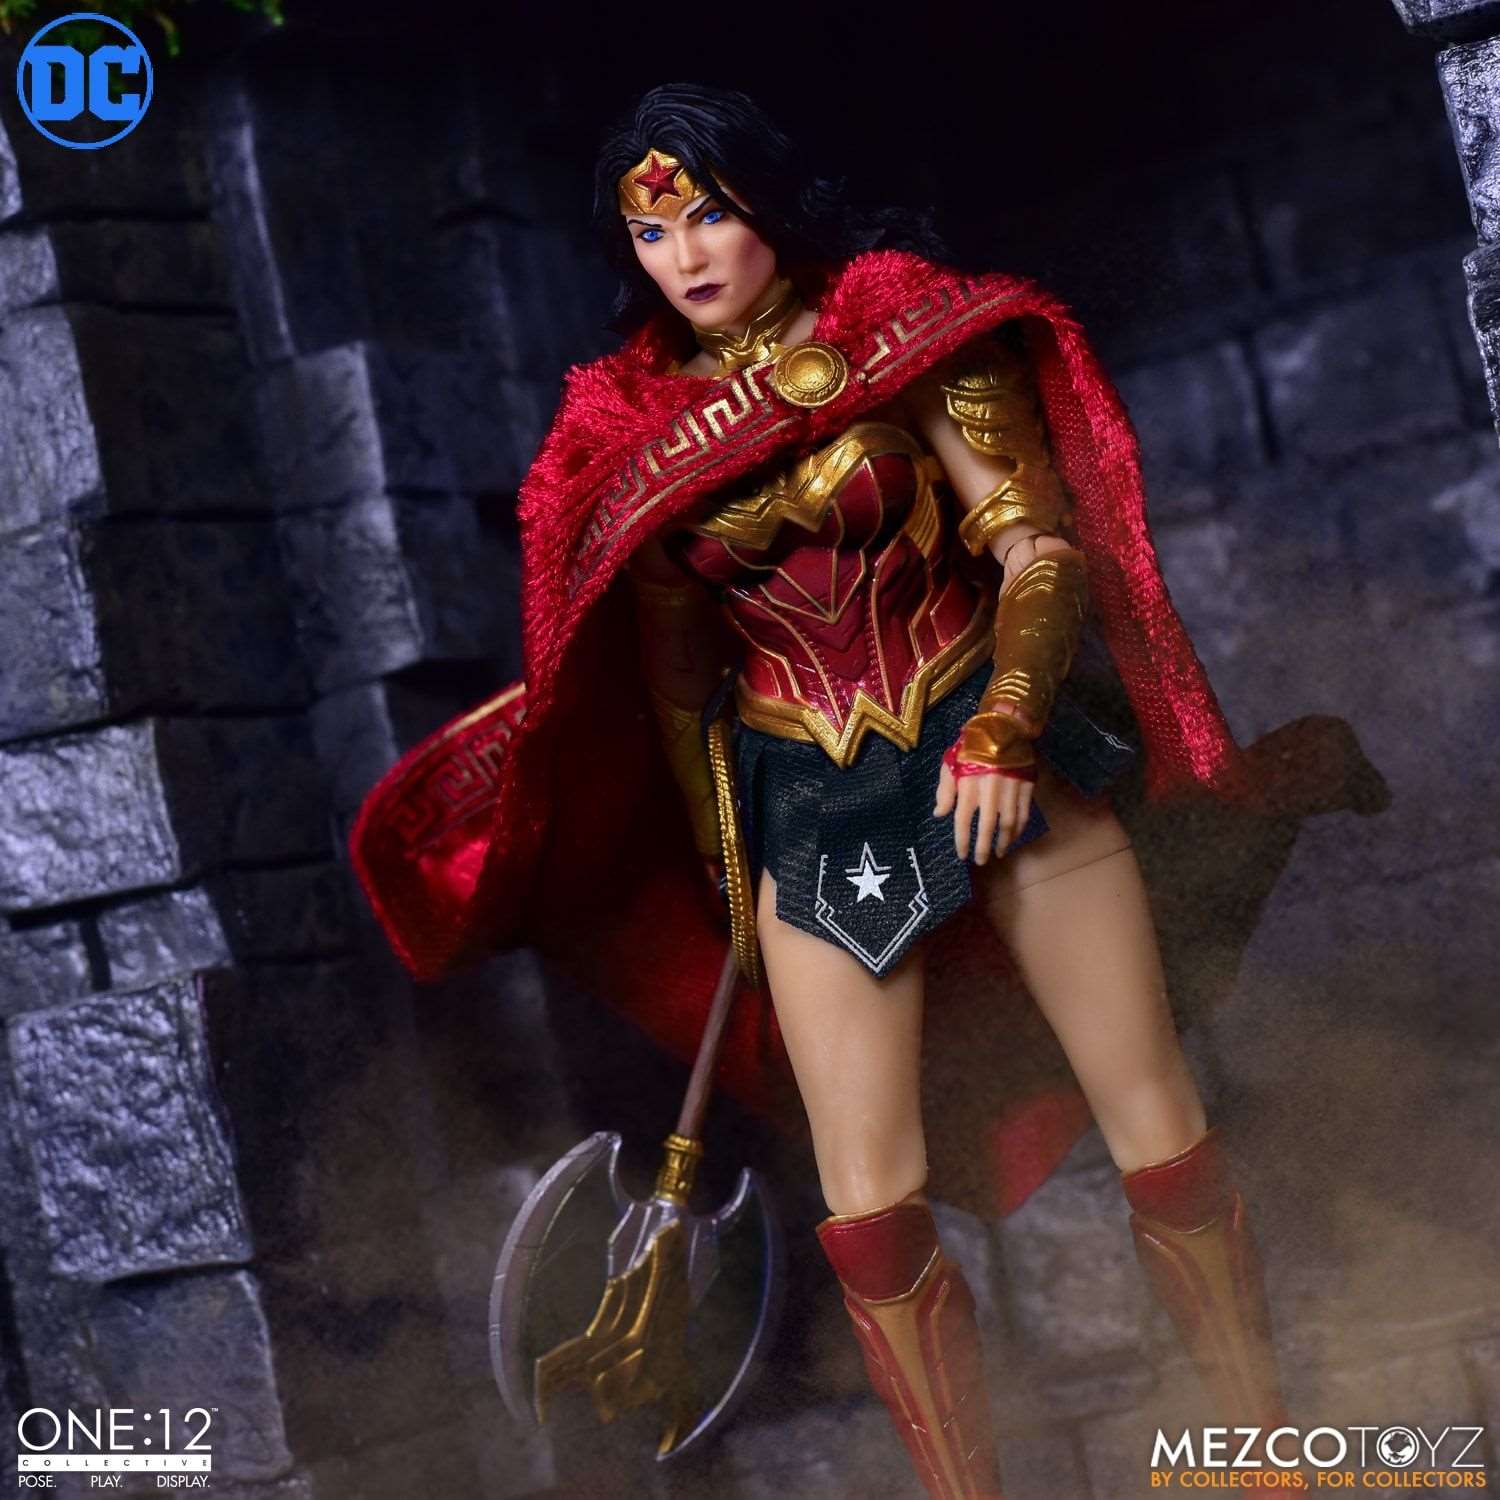 Mezco One:12 DC Universe Wonder Woman figure with axe and cape